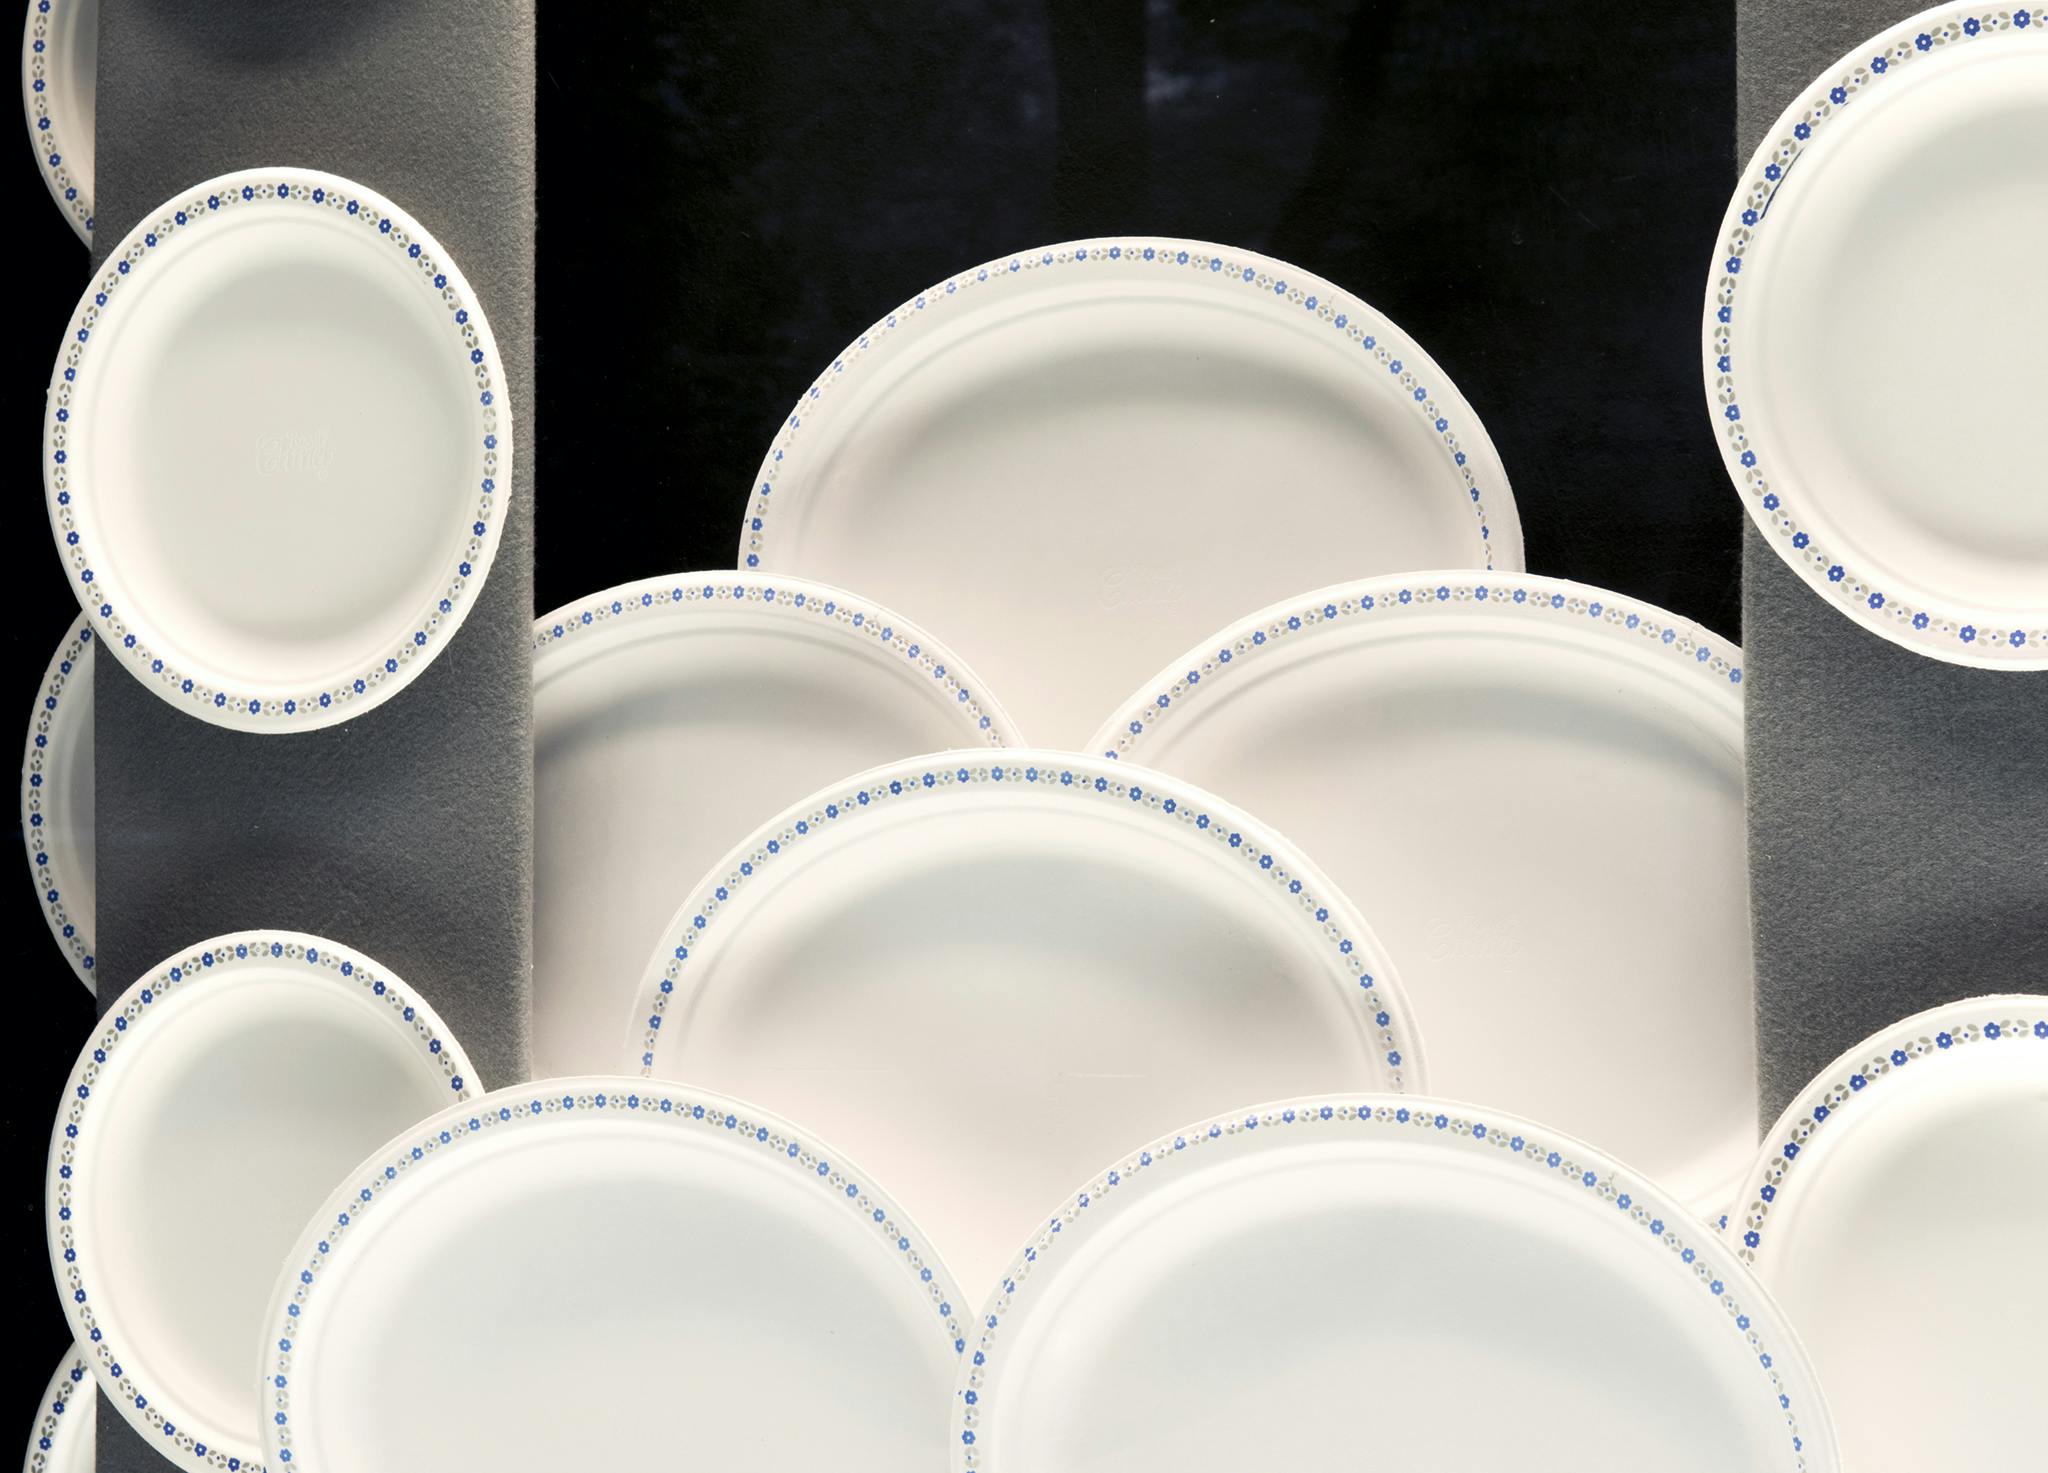 A close up view of an installation containing white paper plates edged with a blue floral pattern. The plates are placed upright over a black background and layered creating a scalloped pattern. 